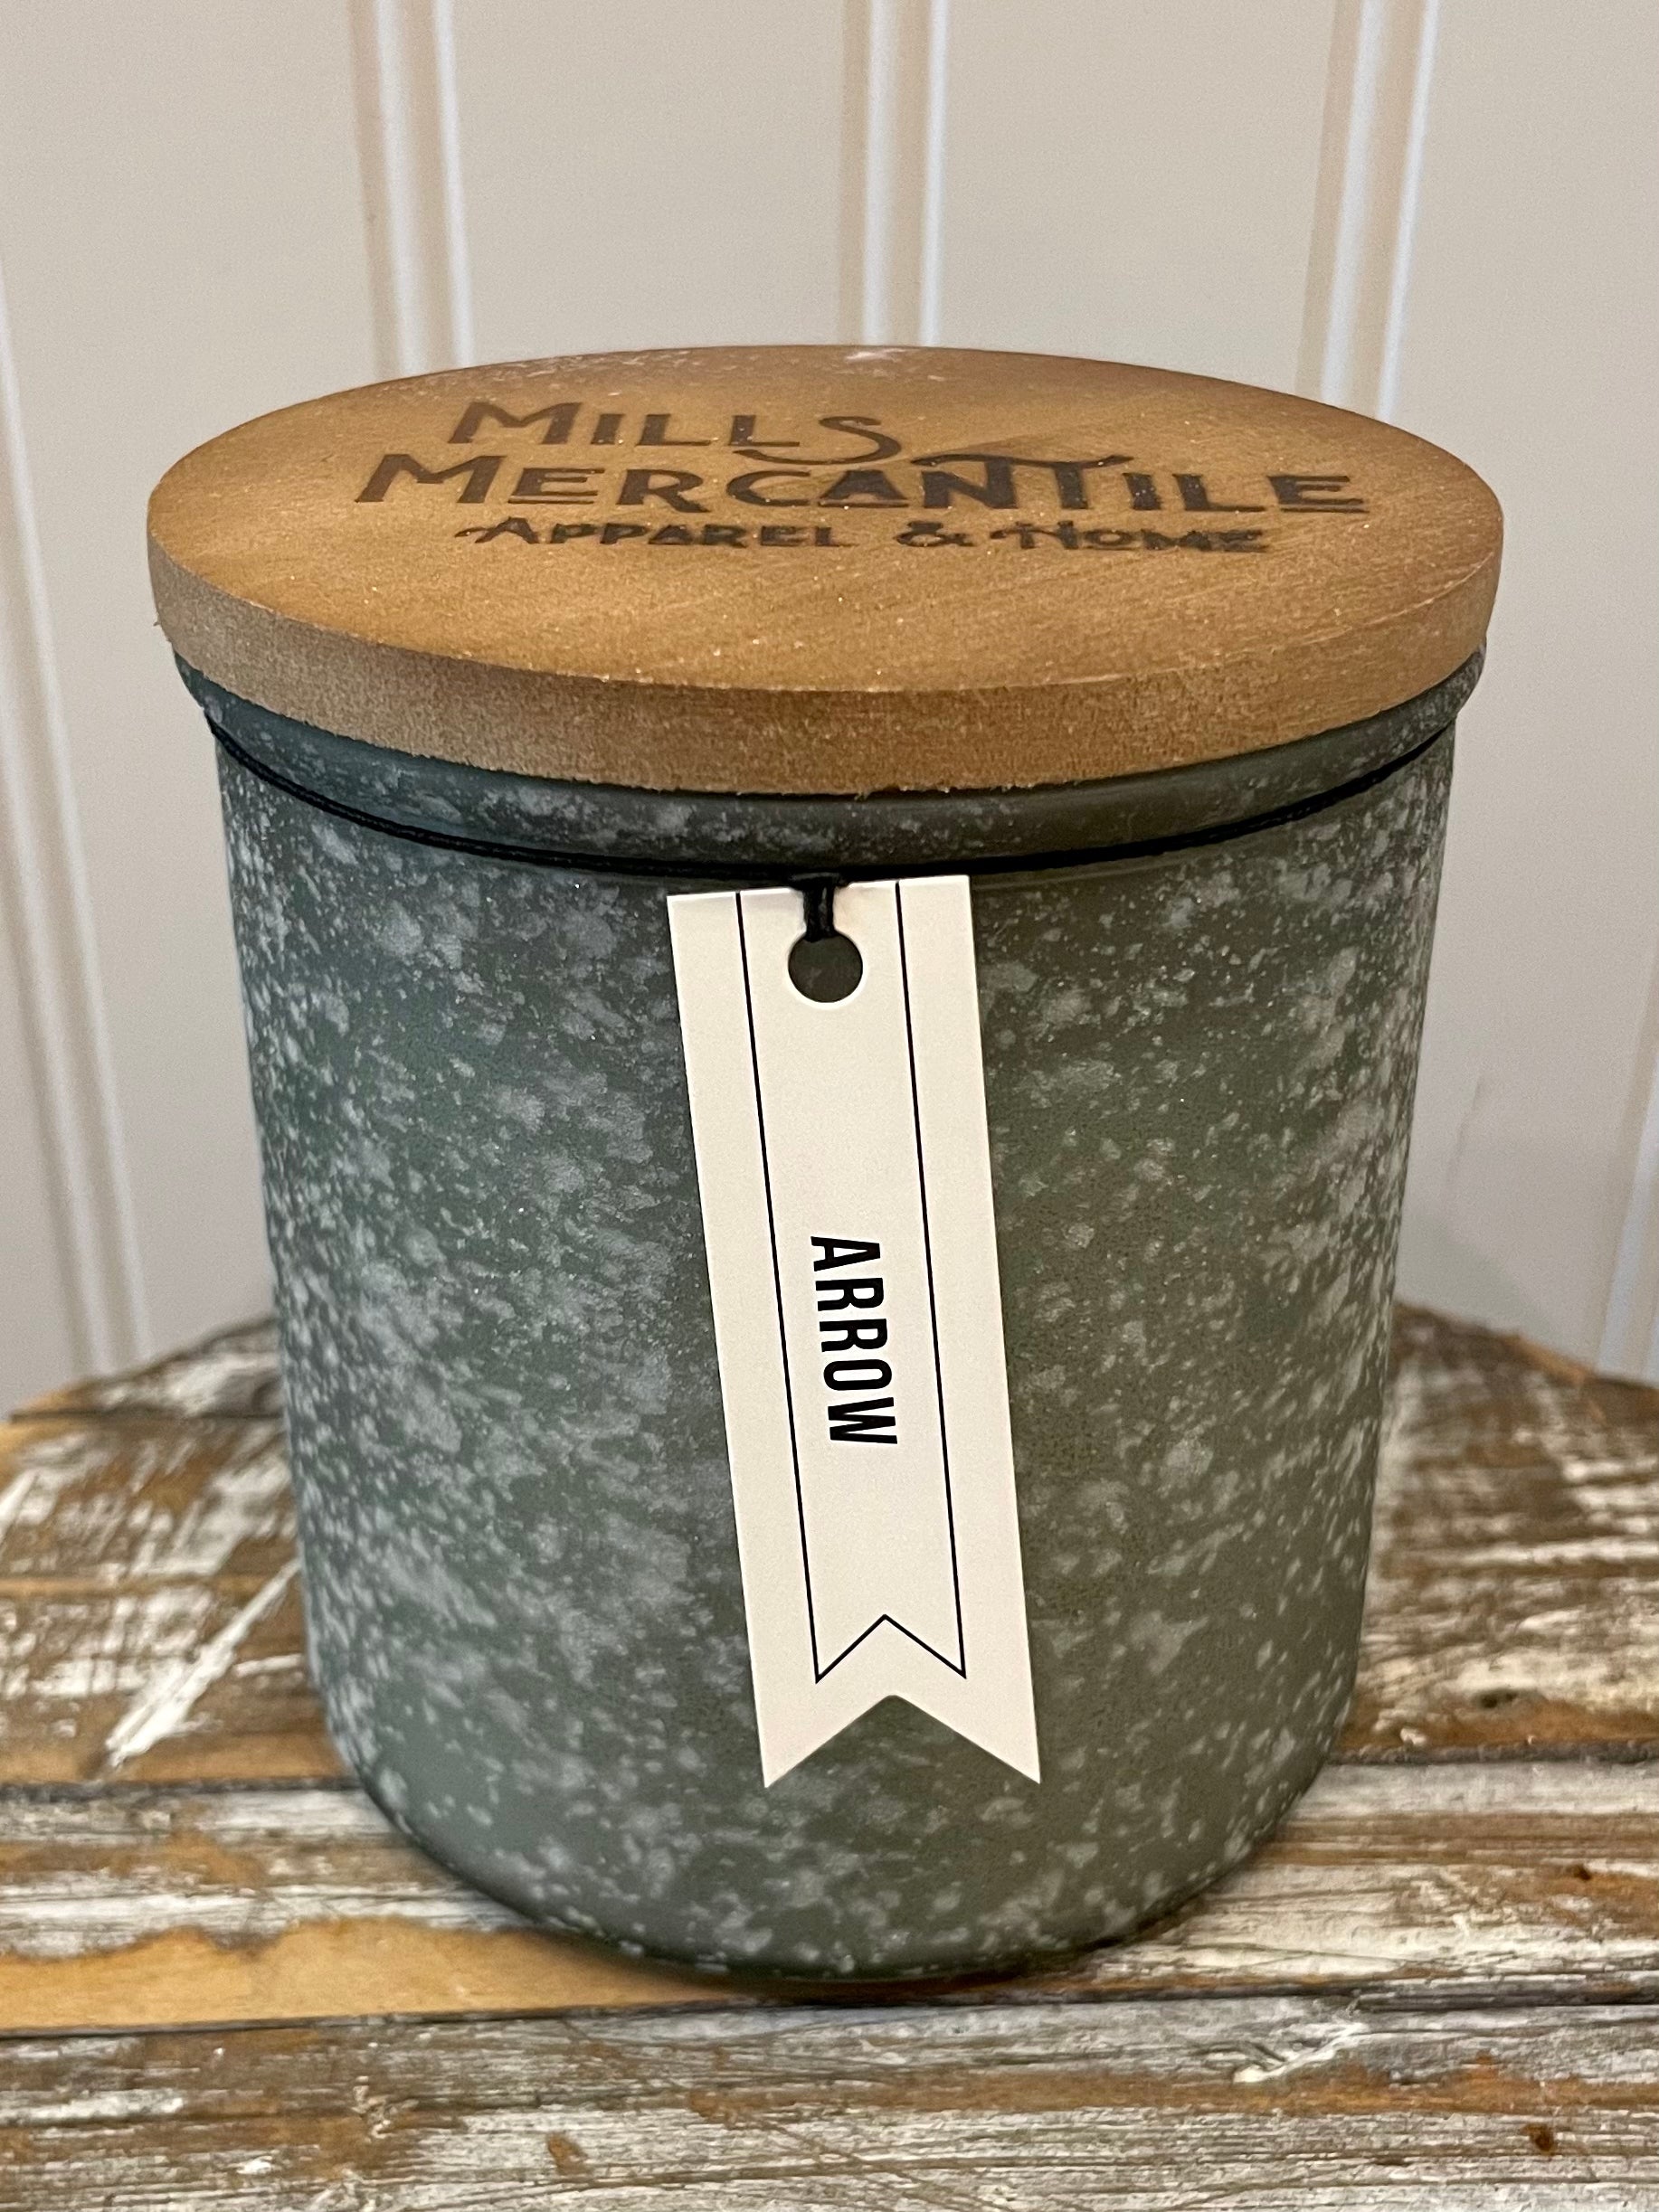 Mills Mercantile Candle - Arrow Scent